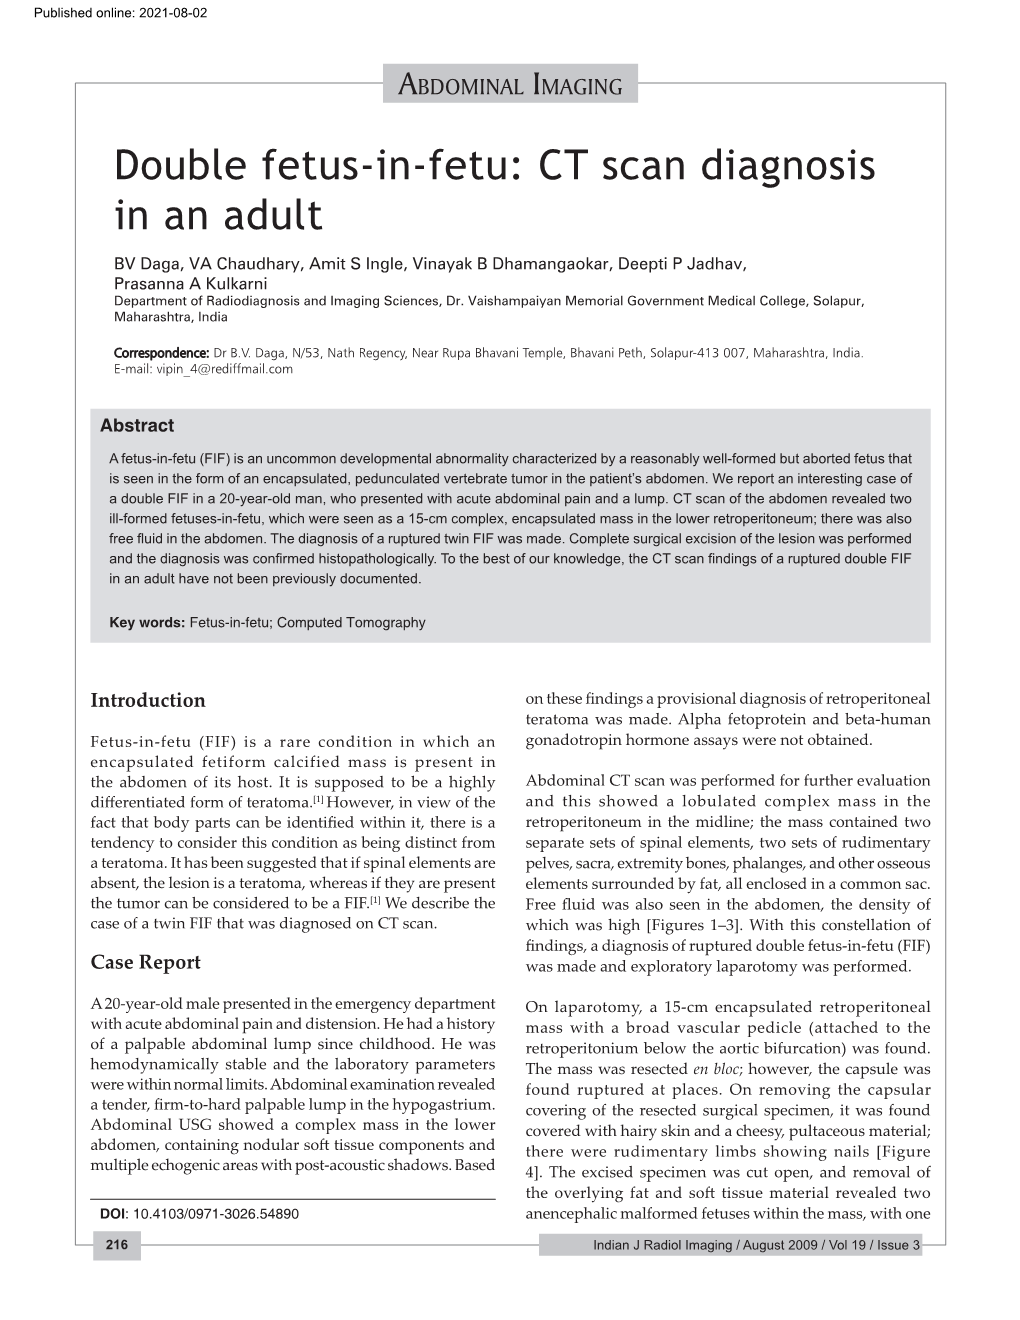 Double Fetus-In-Fetu: CT Scan Diagnosis in an Adult